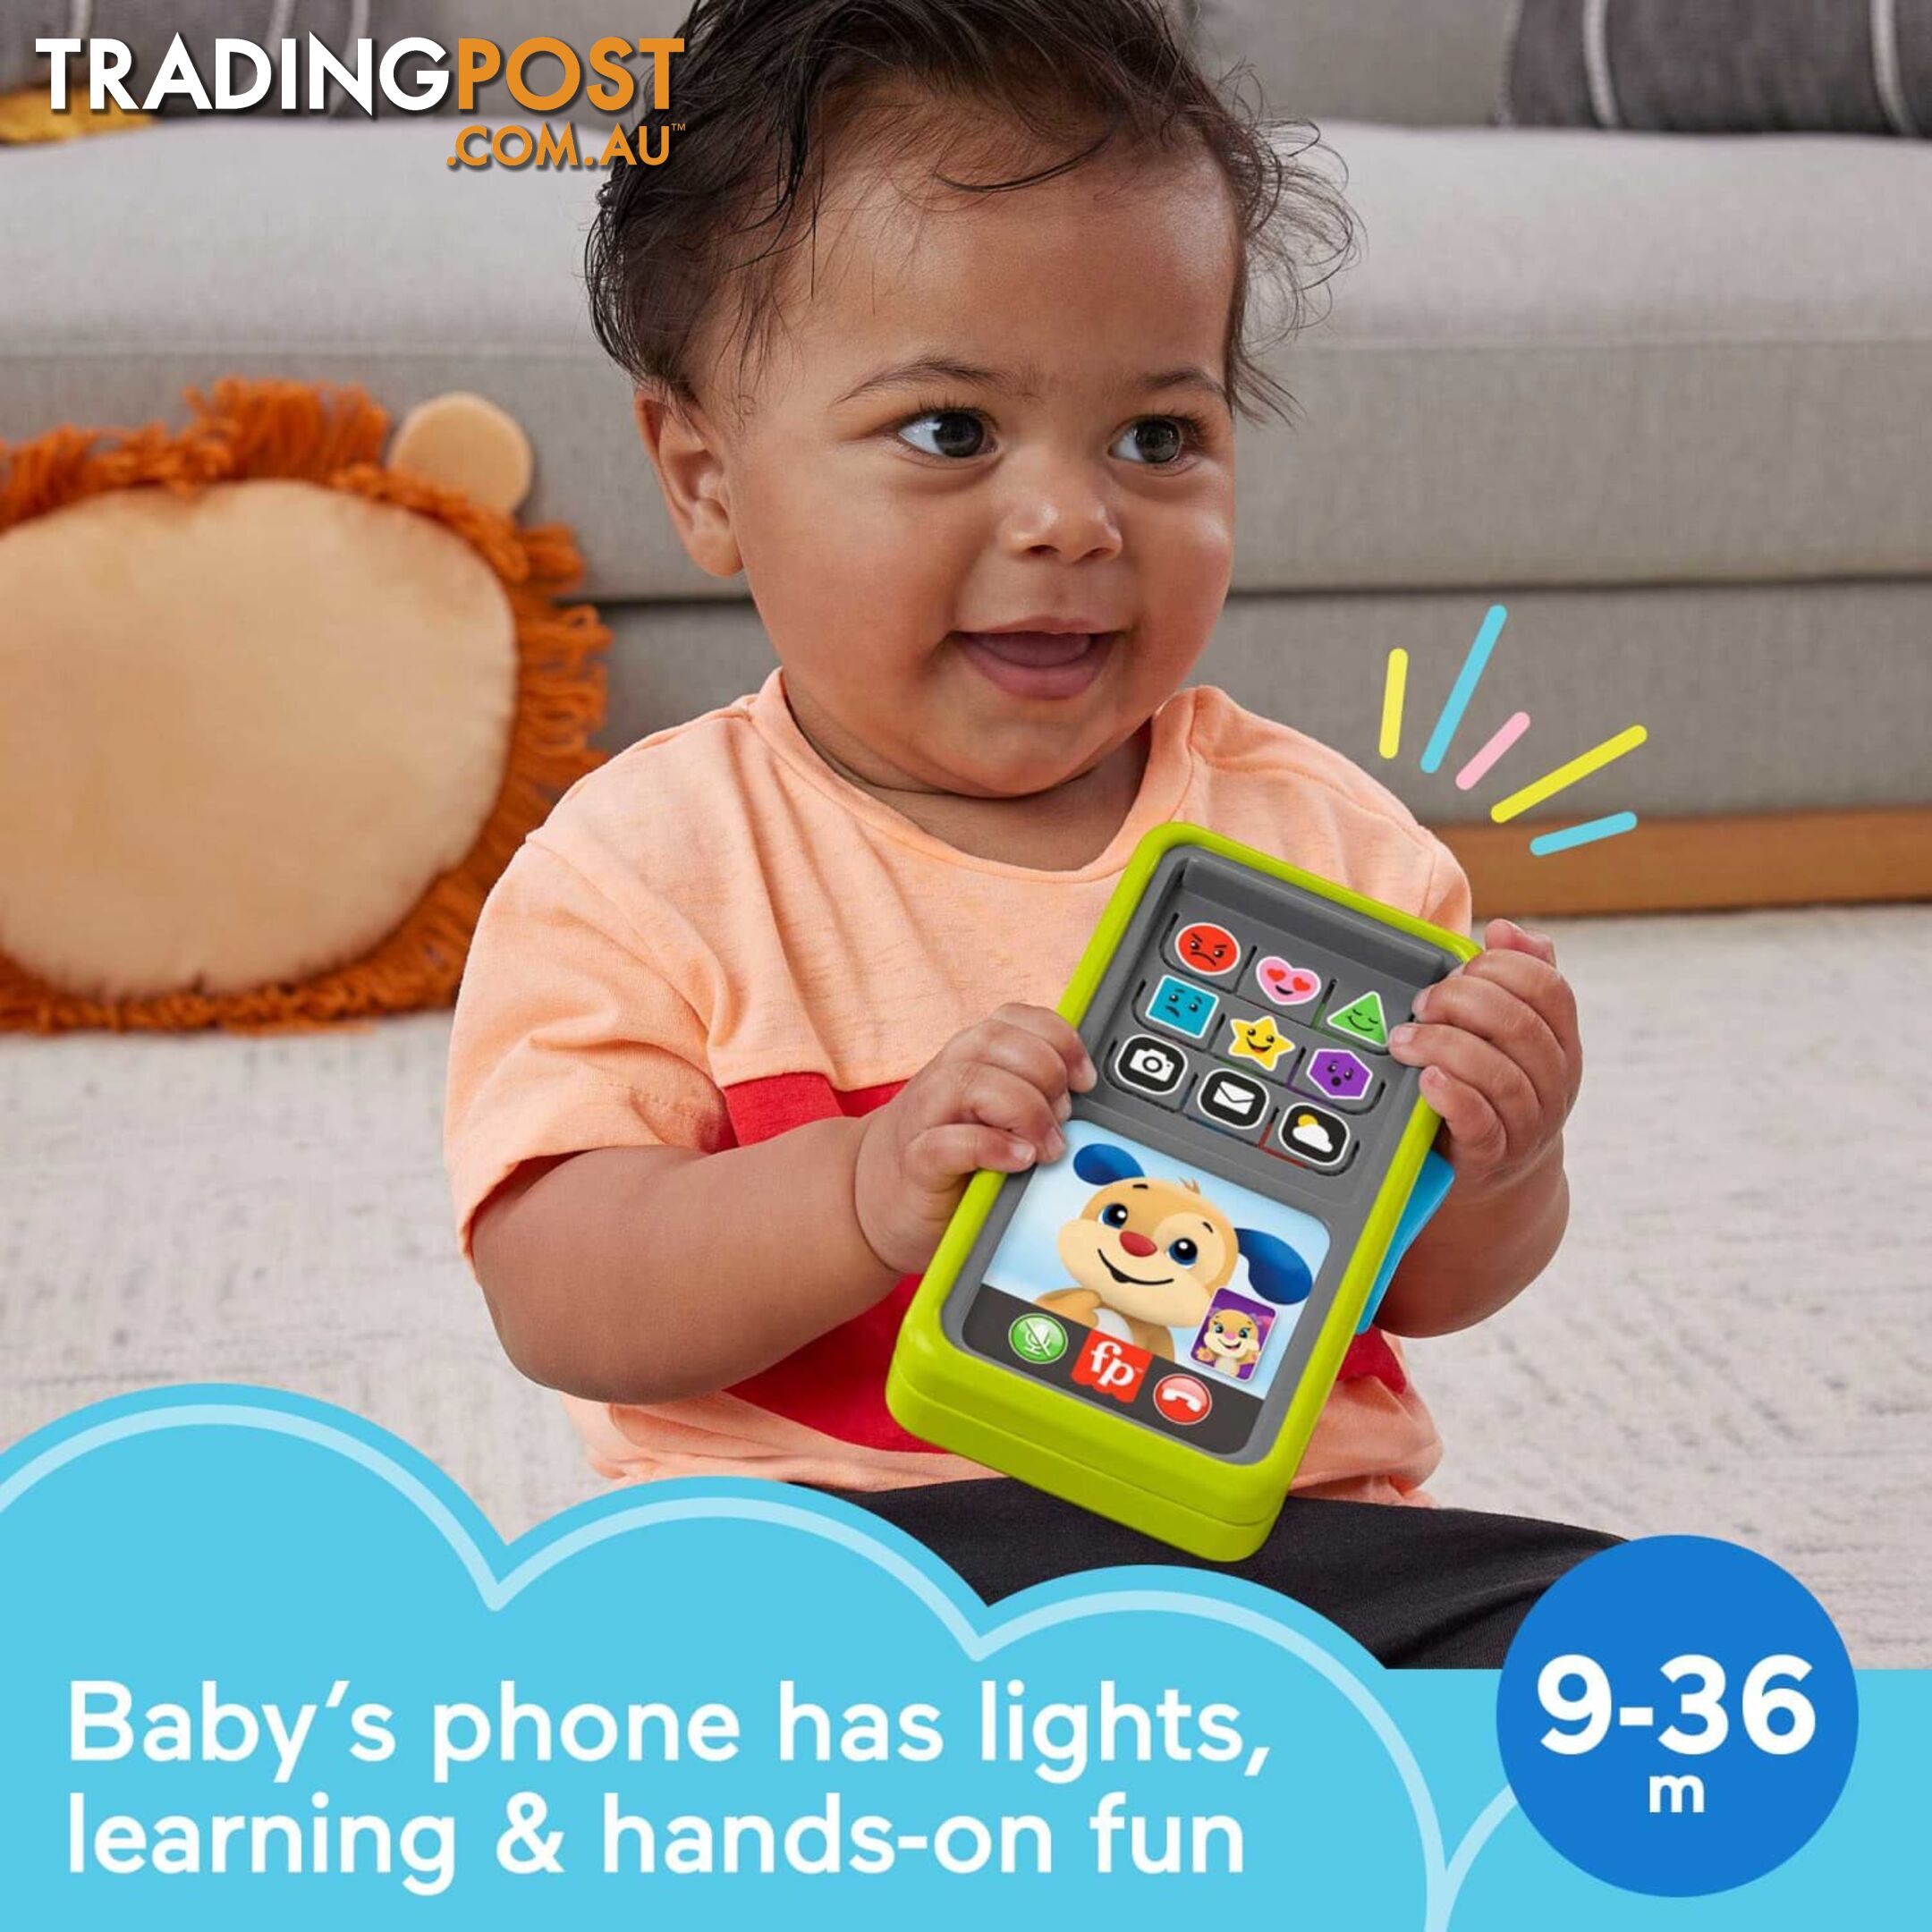 Fisher-Price Laugh & Learn 2-in-1 Slide To Learn Smartphone - Mahnm84 - 194735145454